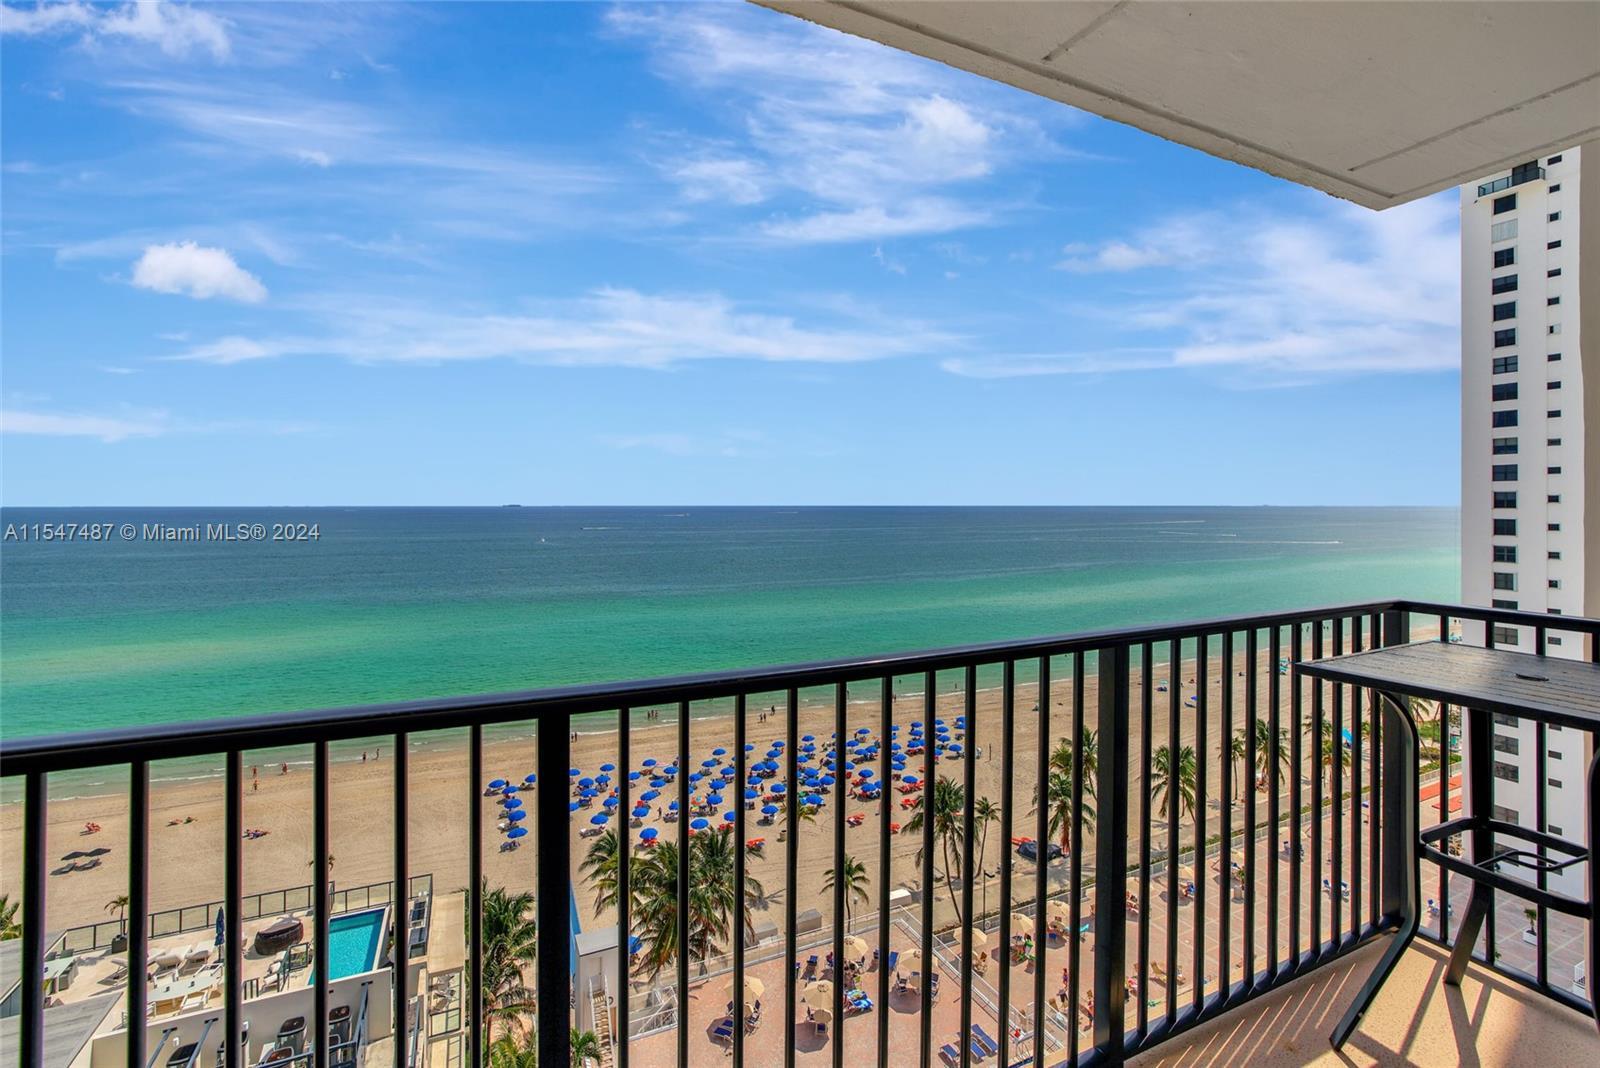 Photo of 2201 S Ocean Dr #1502 in Hollywood, FL